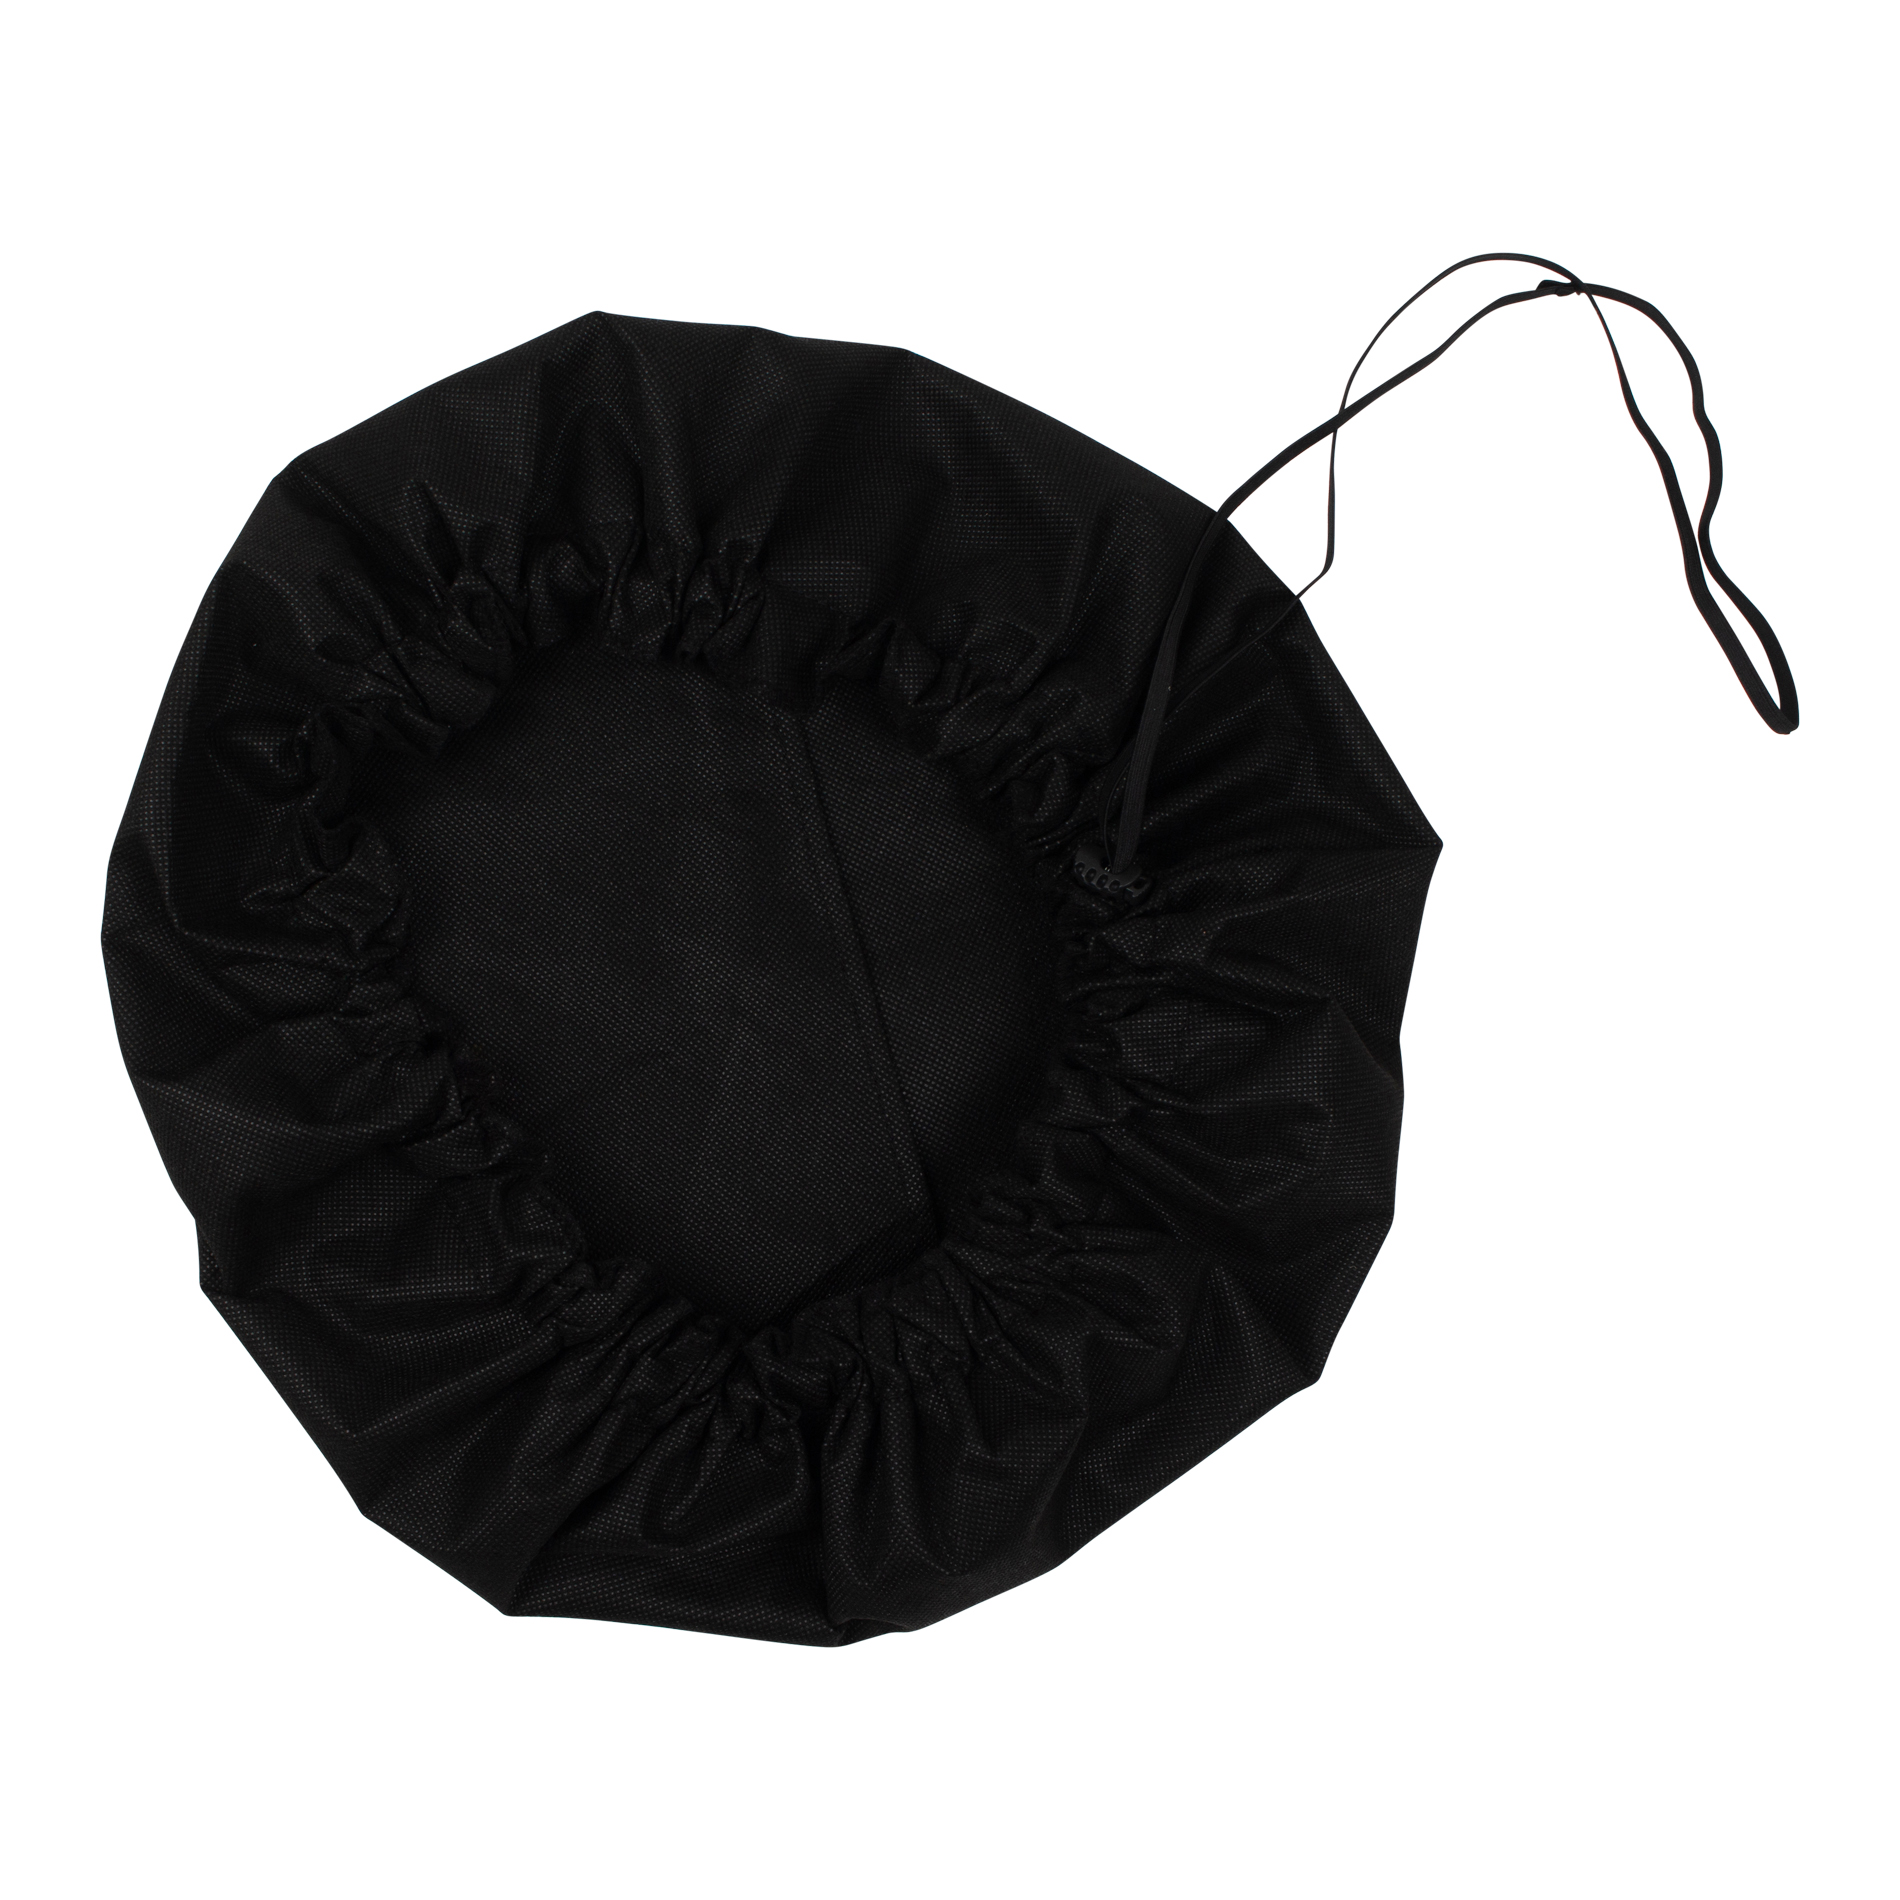 Black Bell Cover with MERV 13 filter, 22-23 Inches